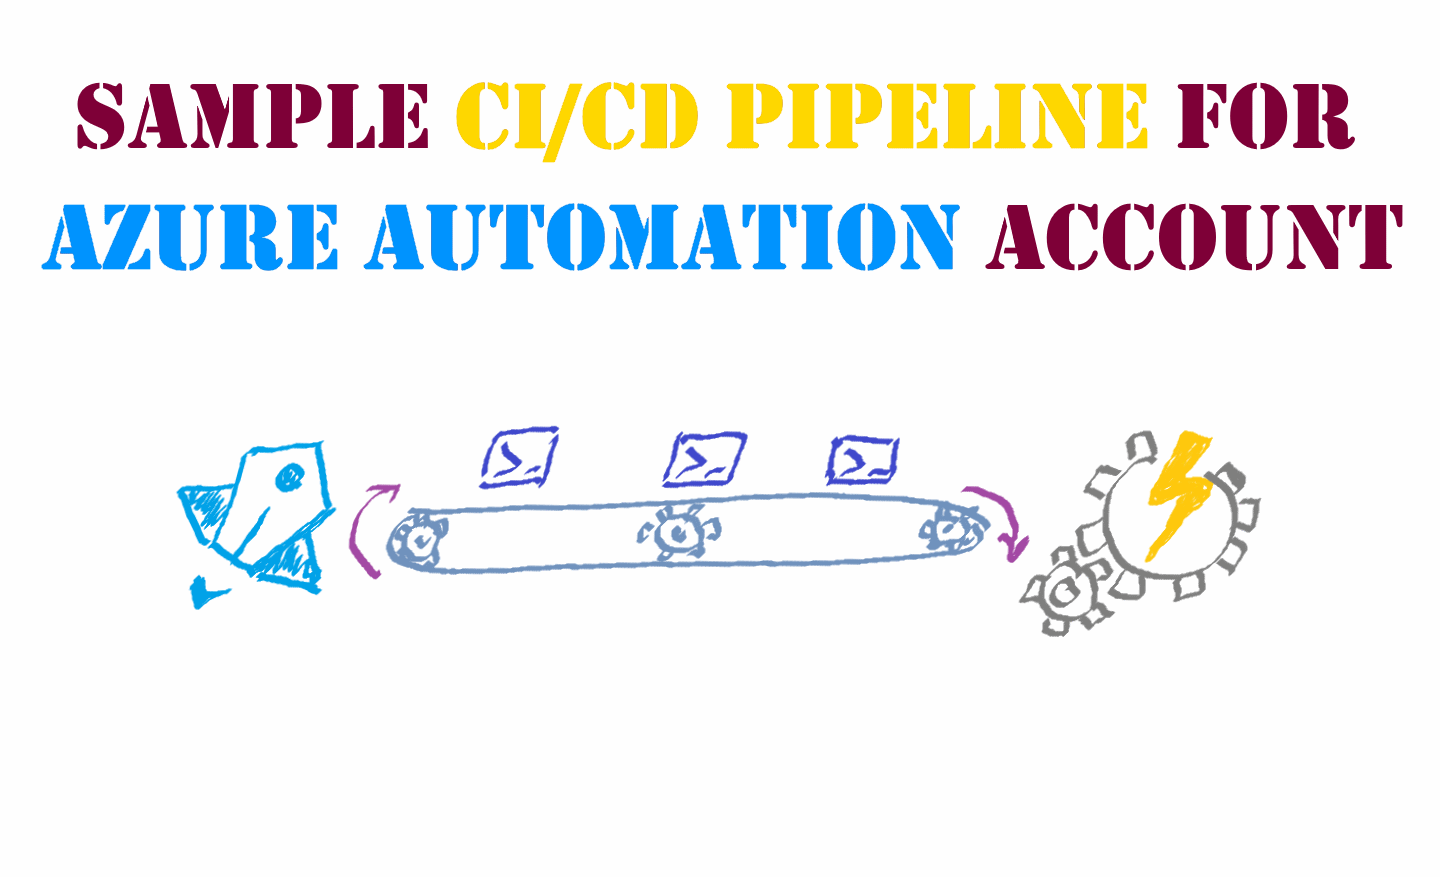 A sample CI/CD pipeline for Azure Automation account